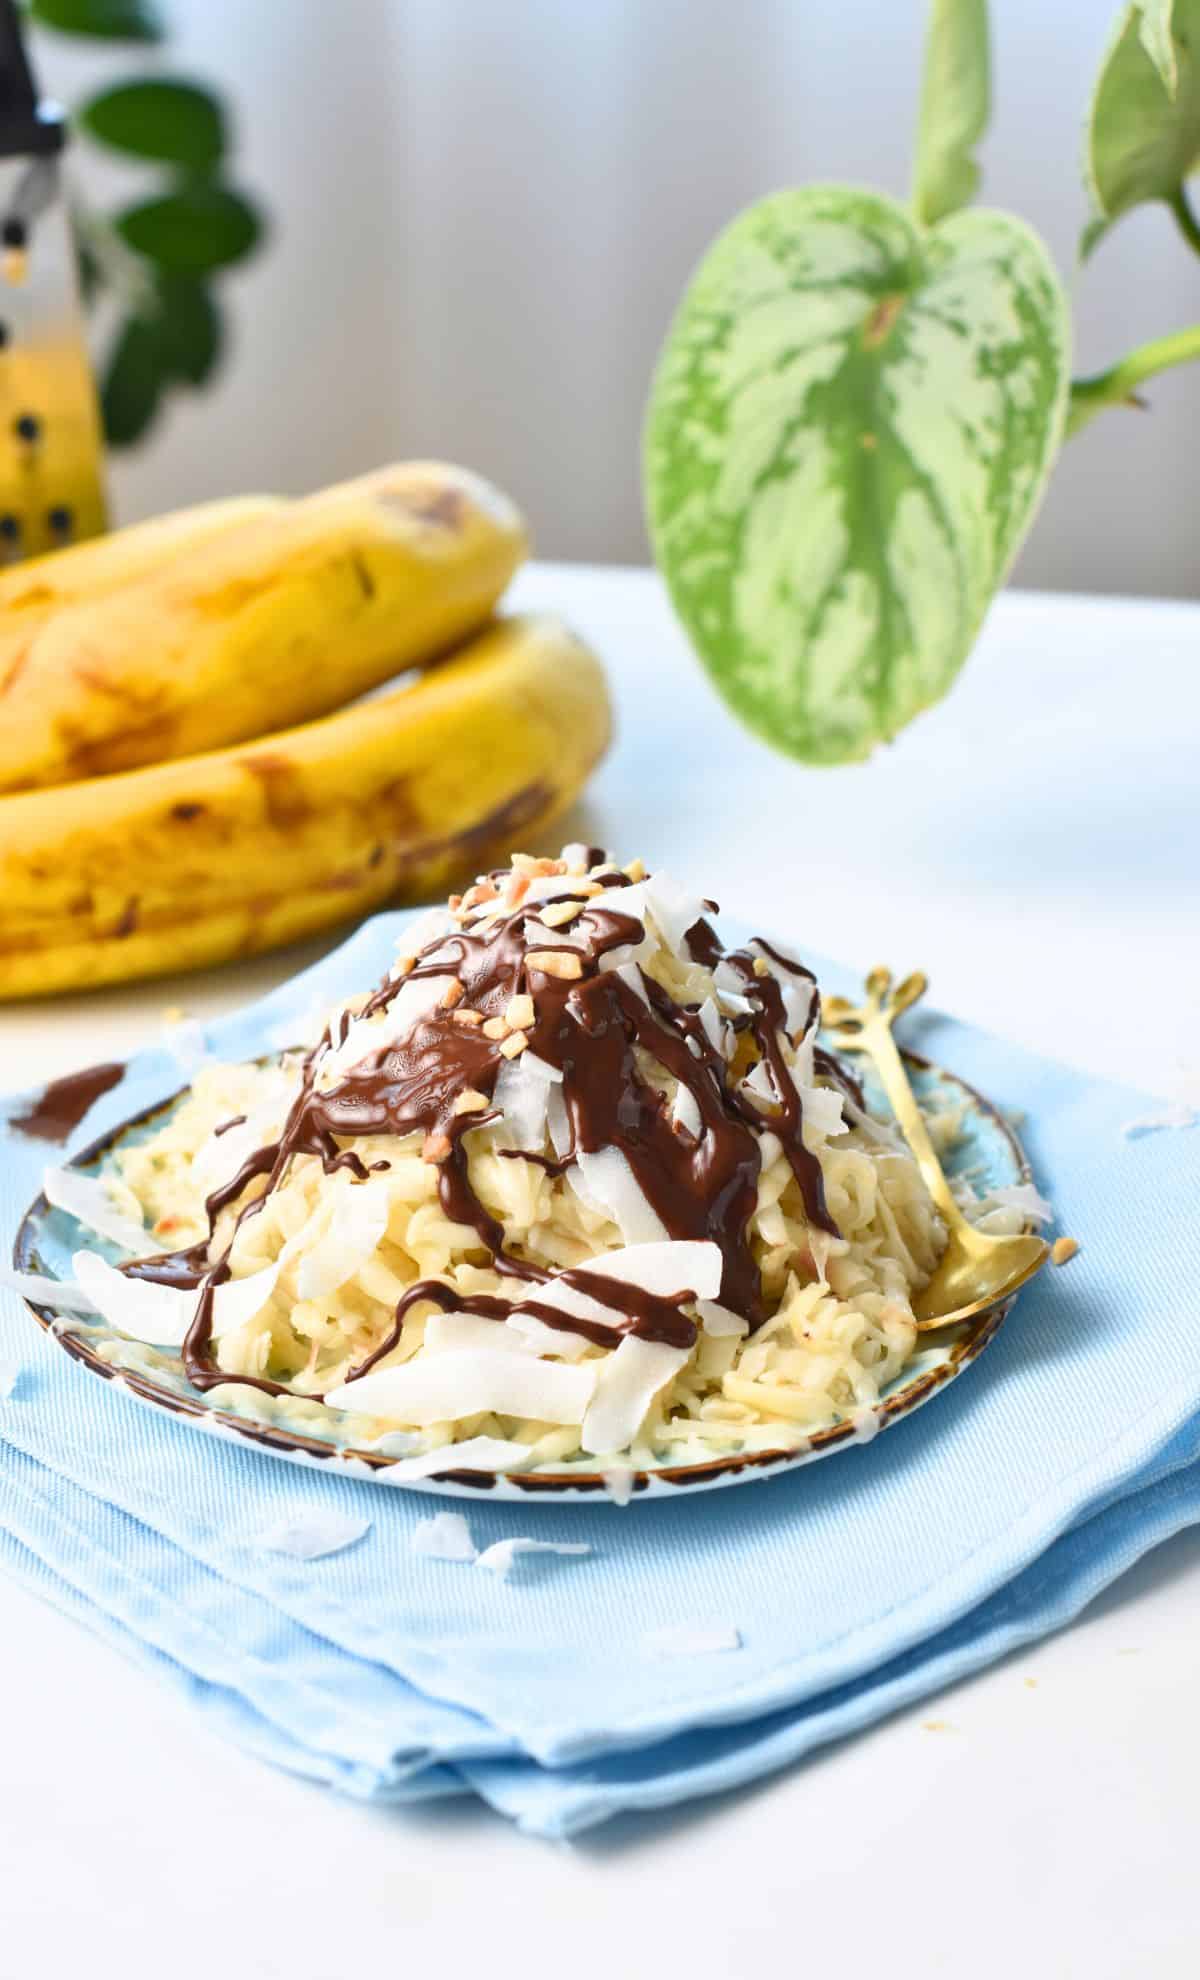 Shaved Banana Ice Cream (No Dairy) - The Conscious Plant Kitchen